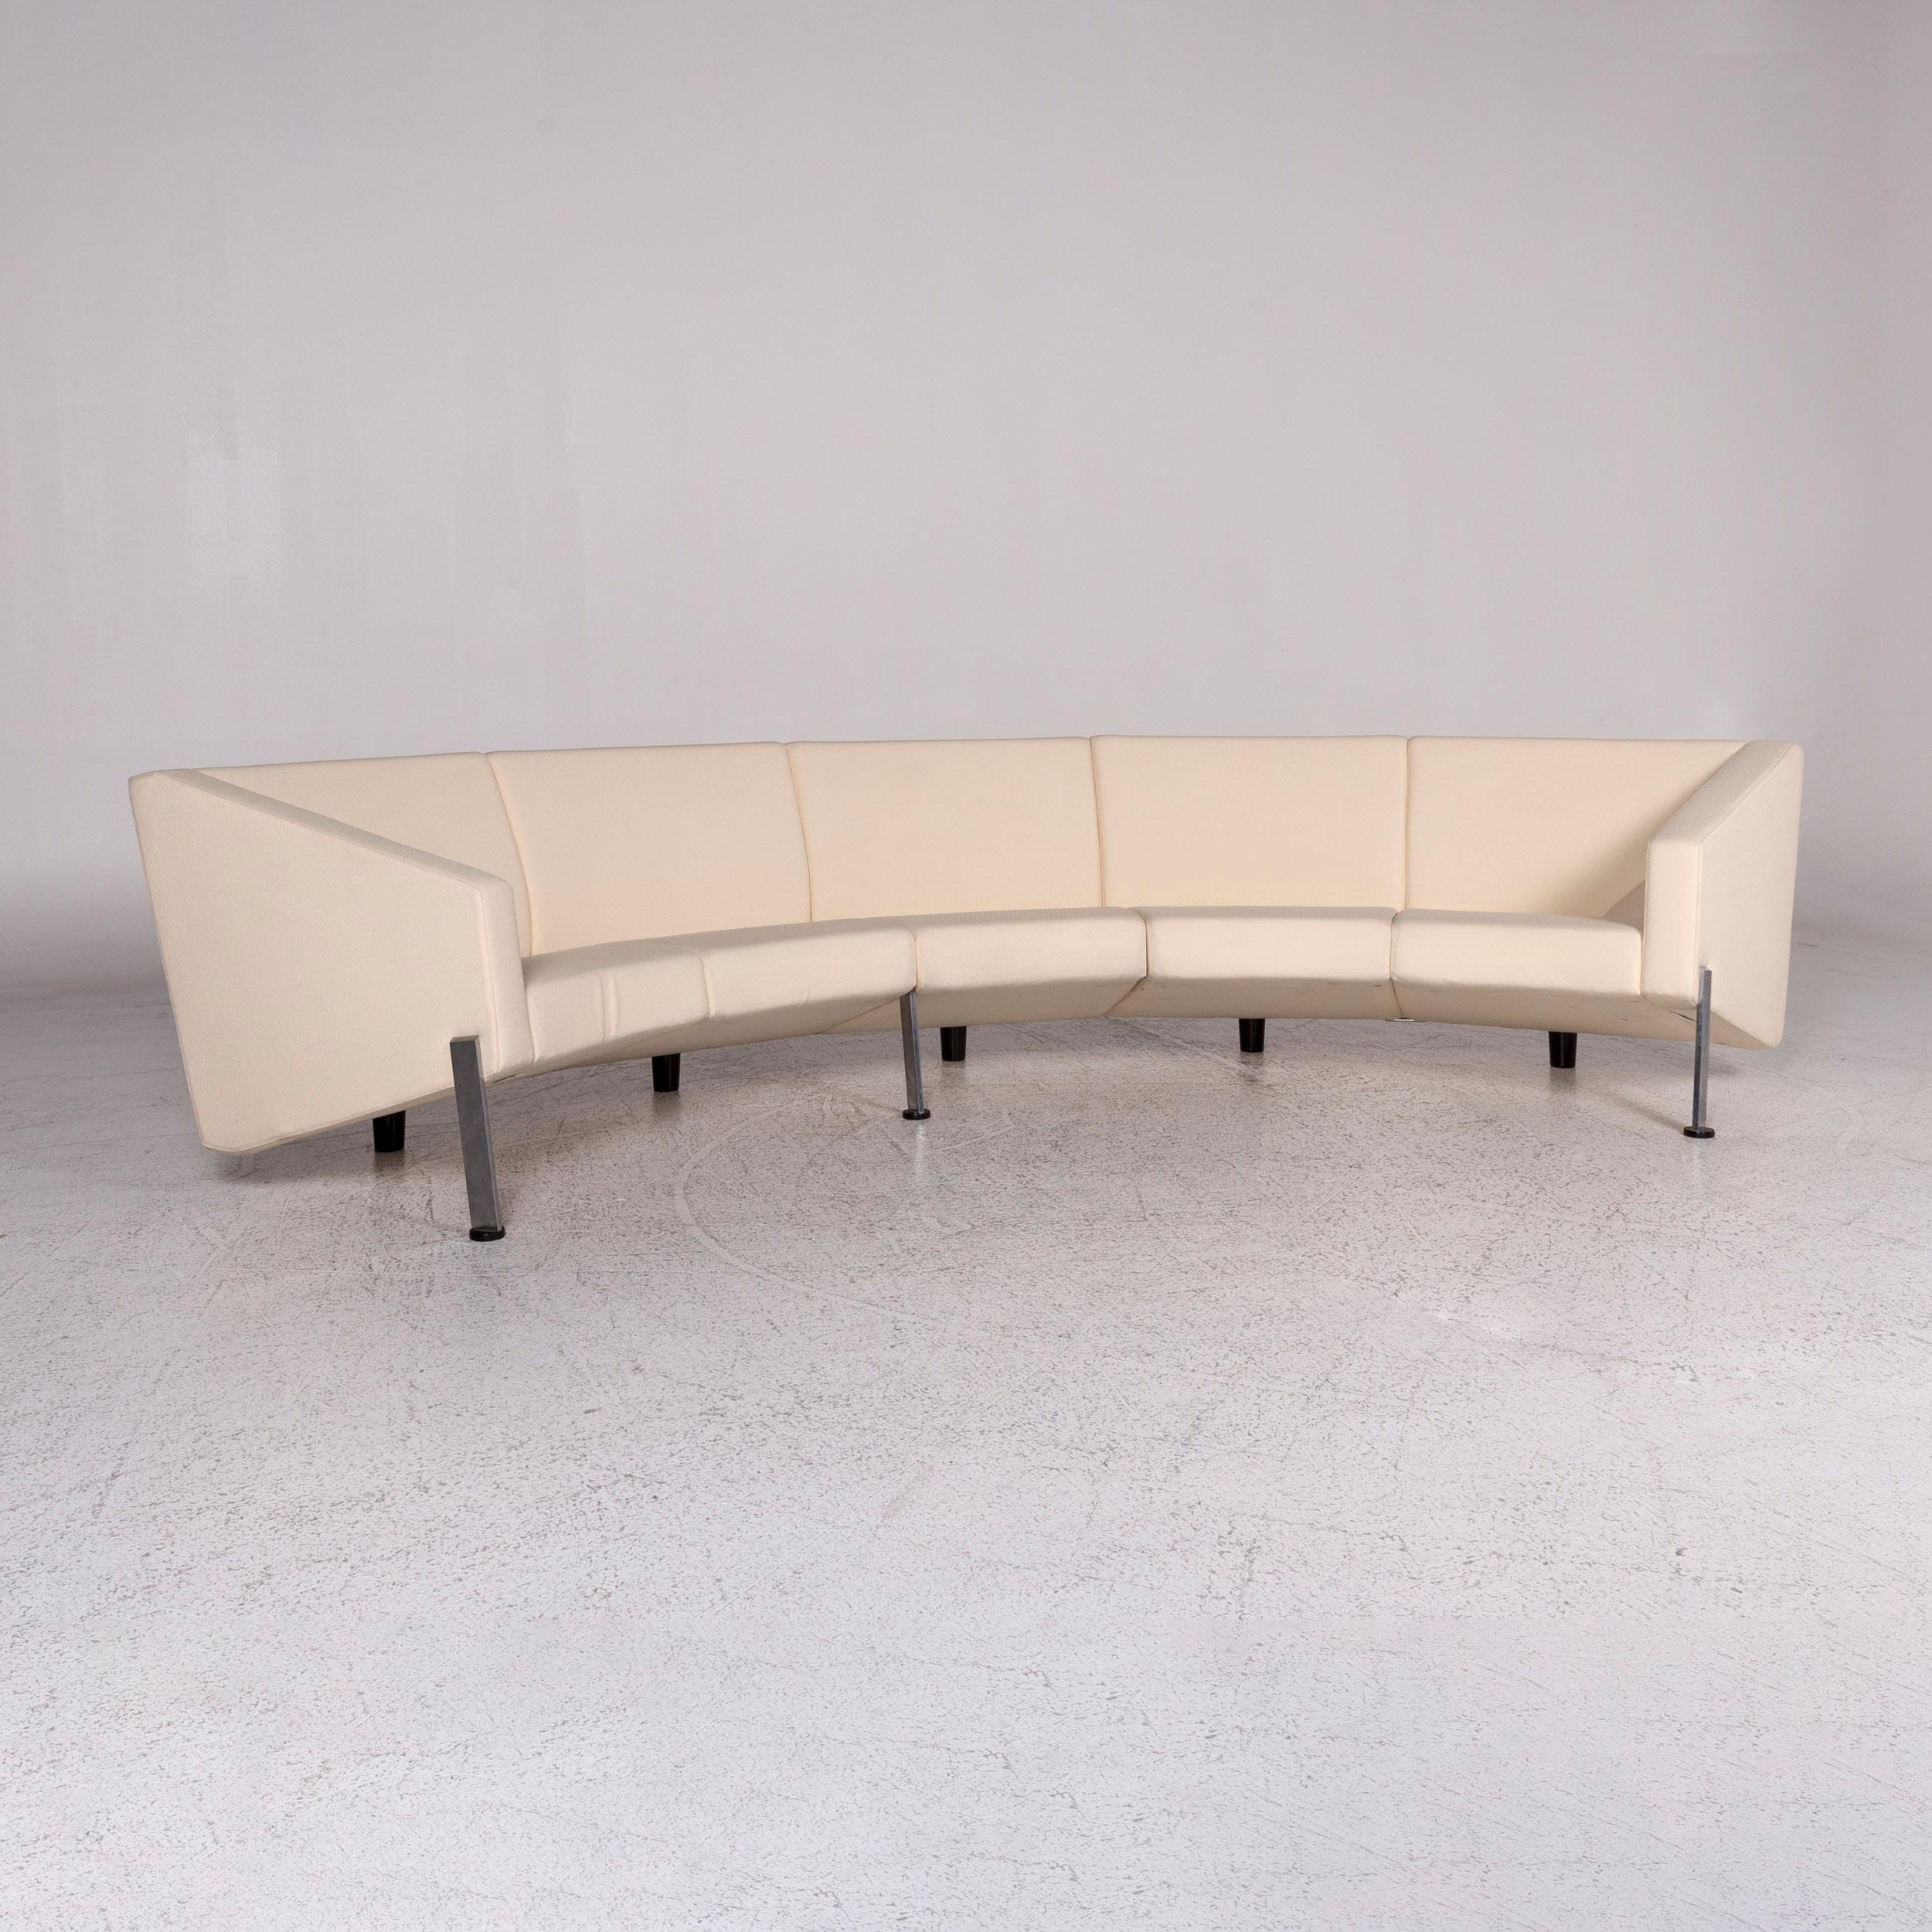 We bring to you a Fritz Hansen decision fabric corner sofa cream sofa couch.

 Product measurements in centimeters:
 
Depth: 141
Width: 343
Height: 74
Seat-height: 39
Rest-height: 65
Seat-depth: 52
Seat-width: 283
Back-height: 38.
 